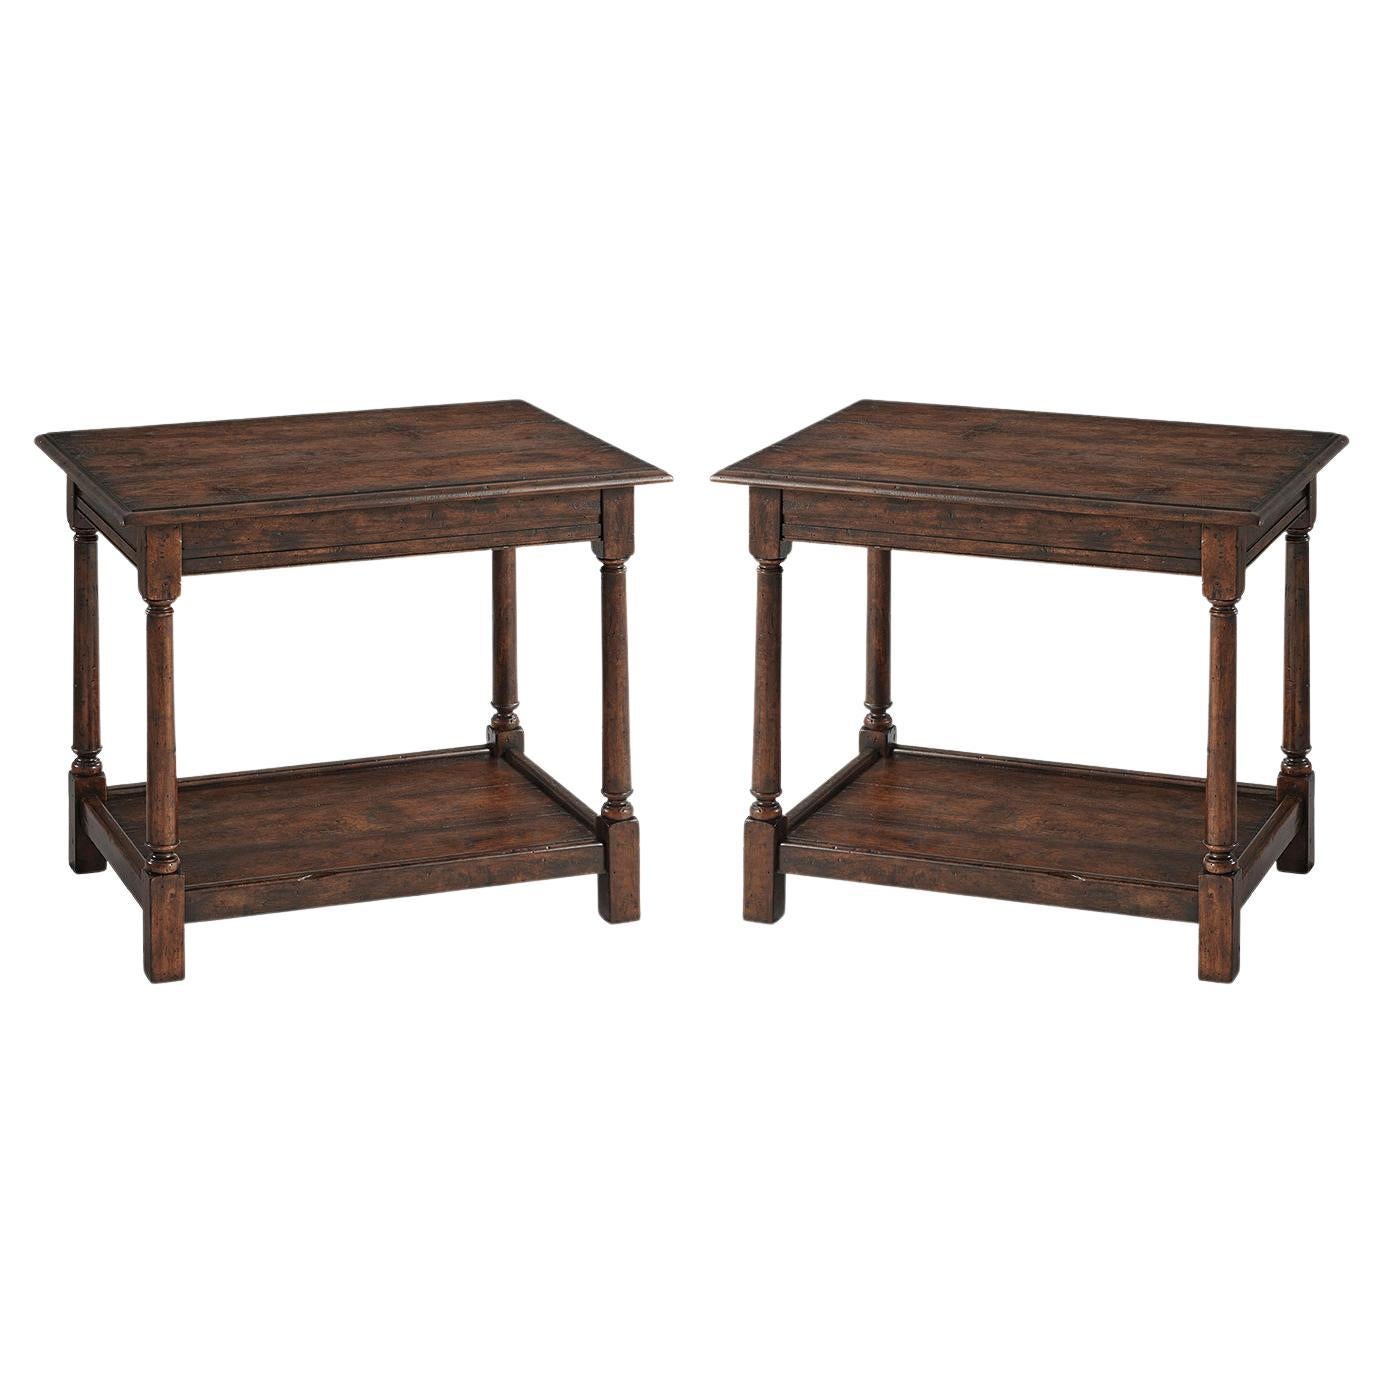 Pair of Early English Side Tables